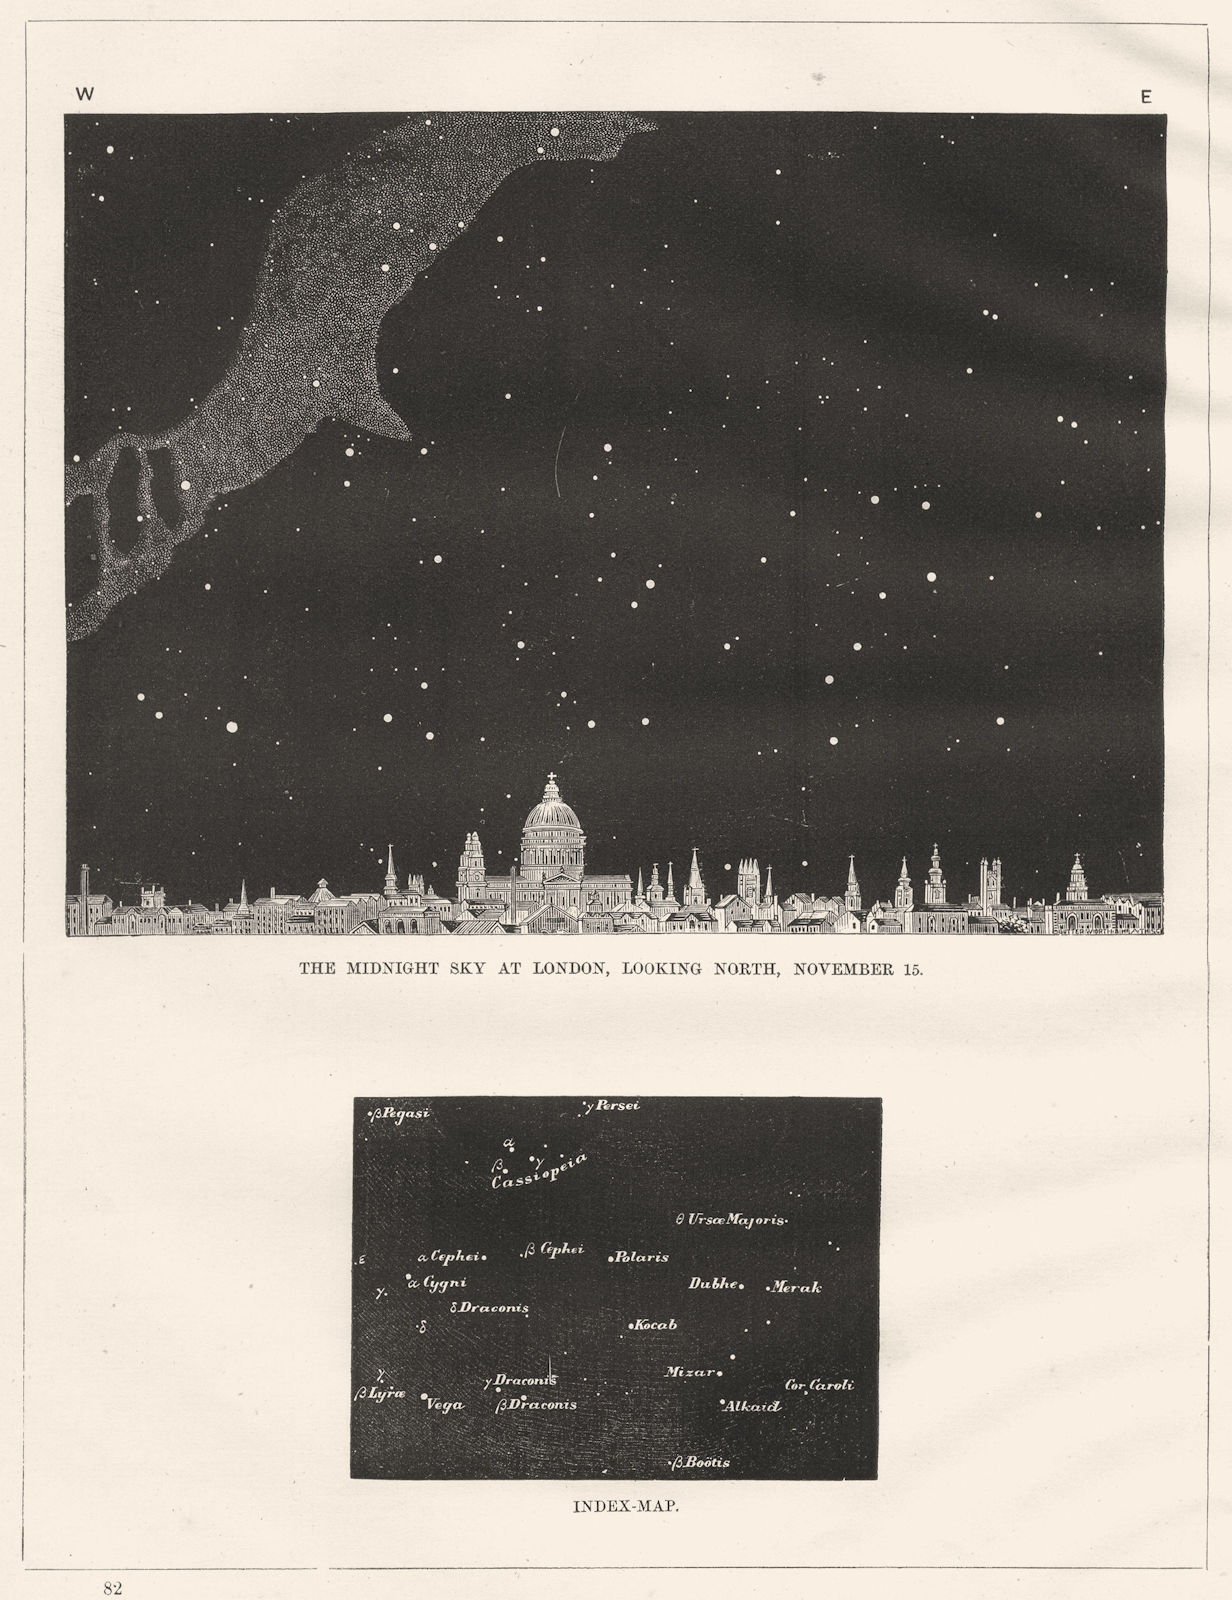 The Midnight Sky at London. Looking North, November 15. St Paul's 1869 print